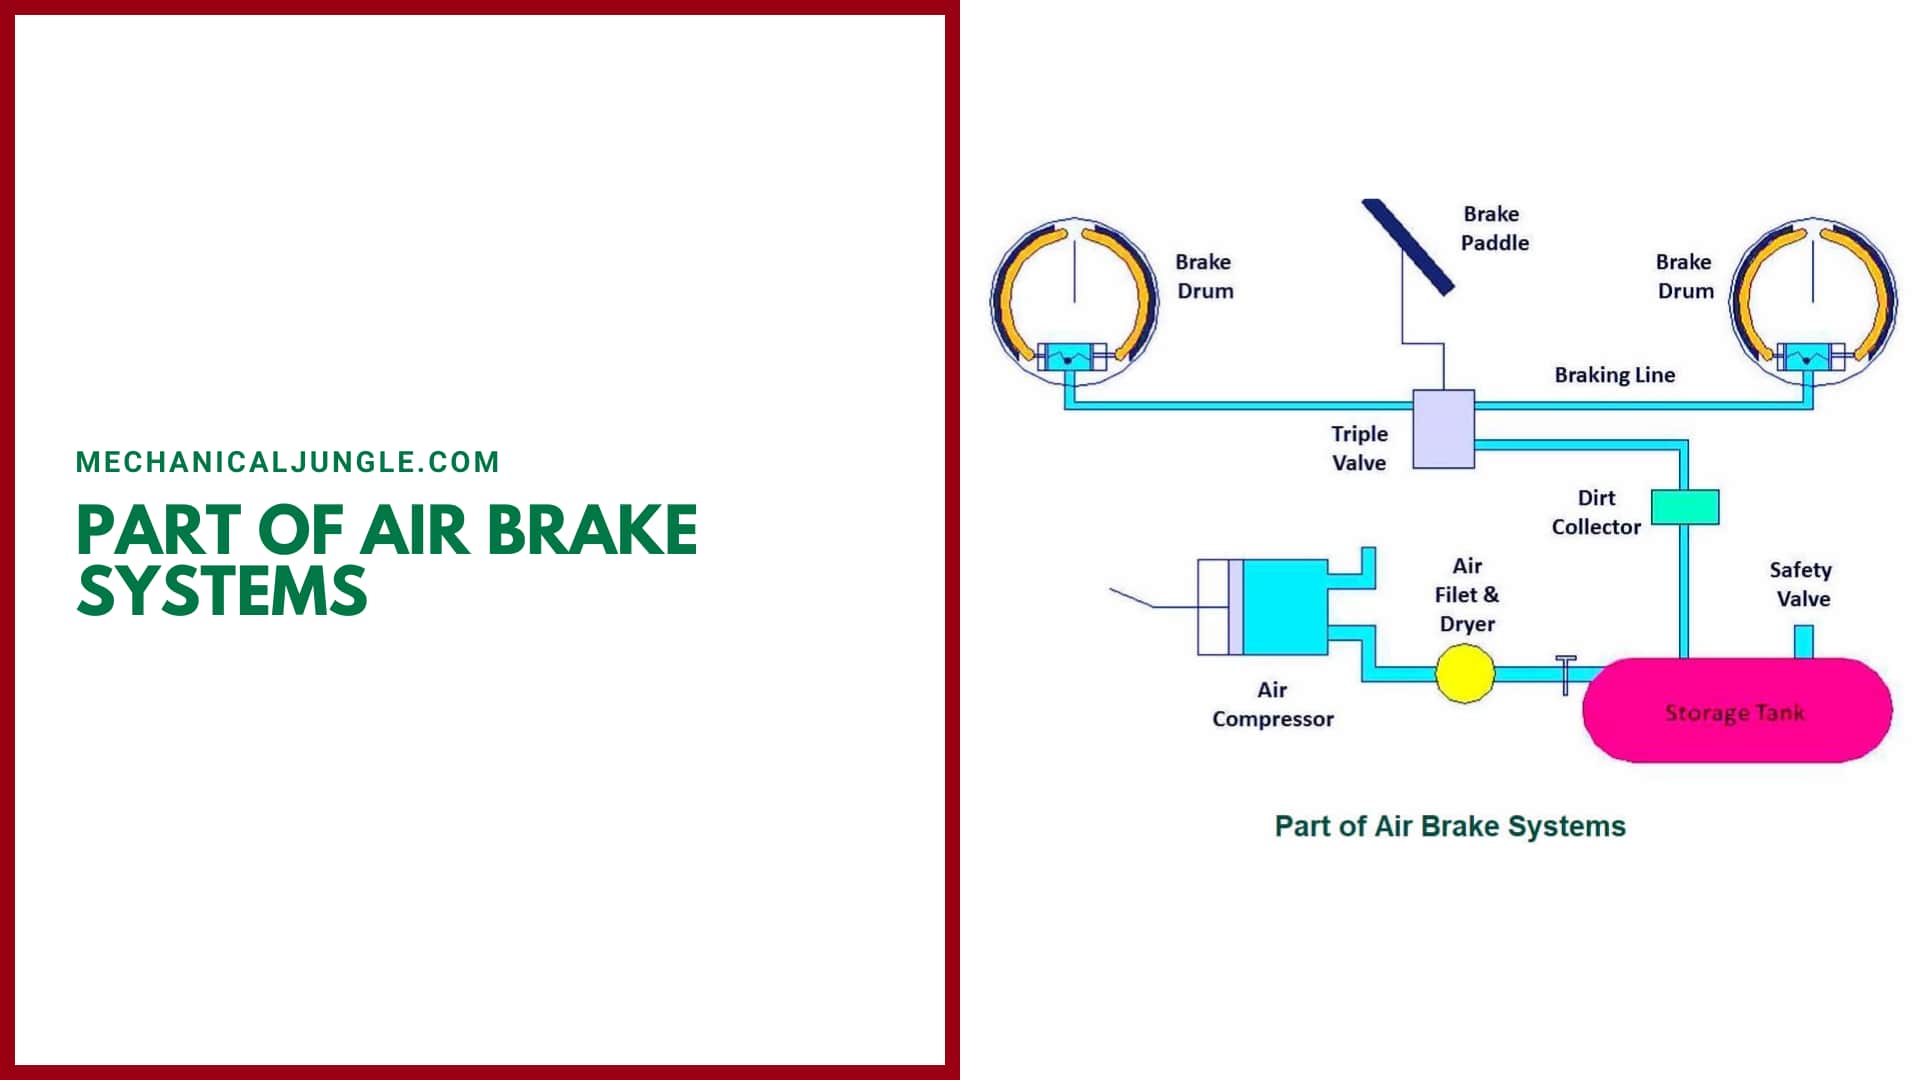 Part of Air Brake Systems